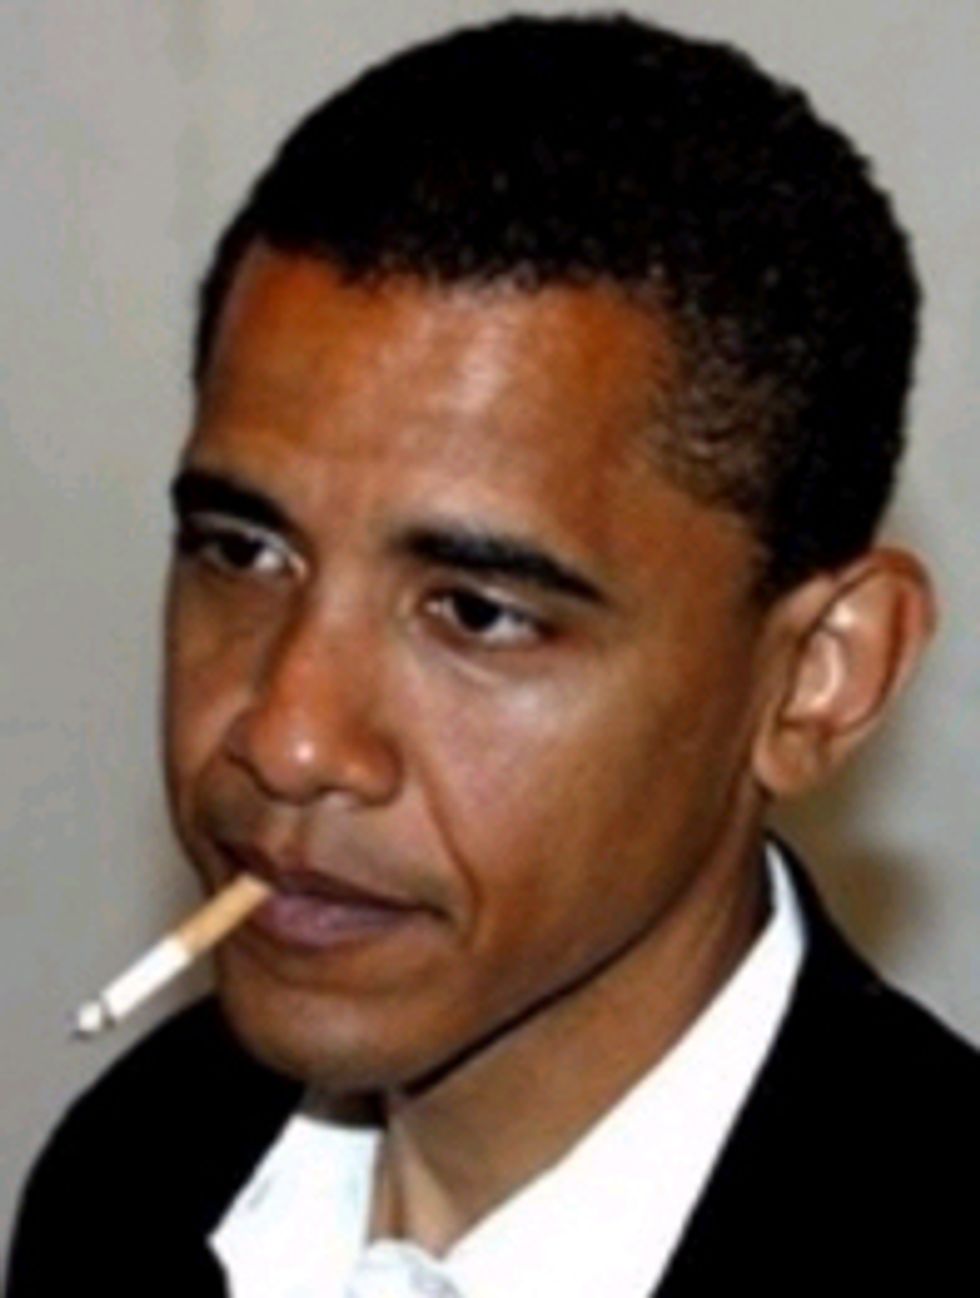 Top Ten New Obama Habits Since He 'Quit Smoking Last Year'